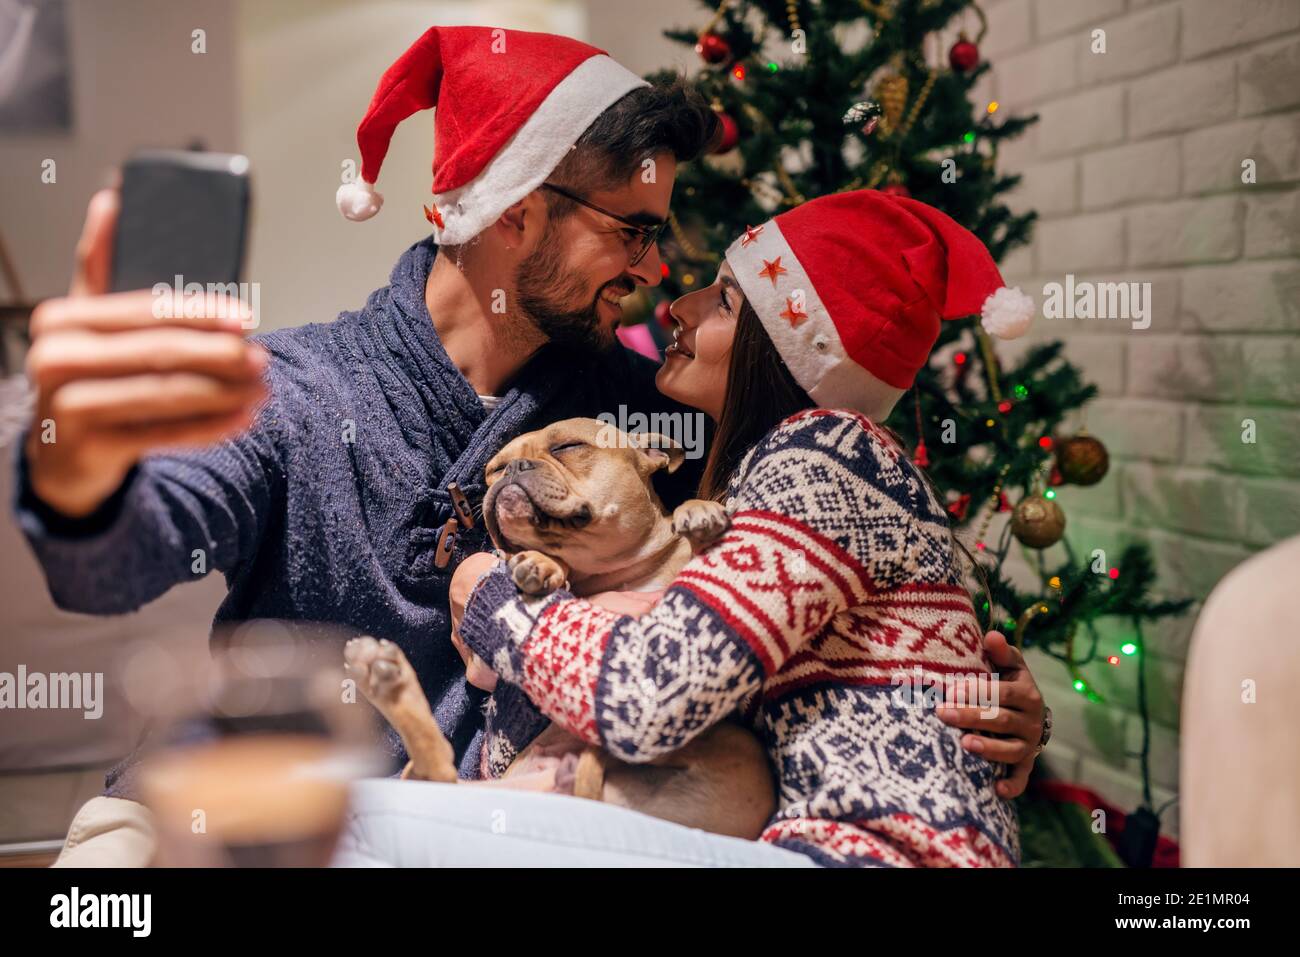 Couple taking self portrait with their dog in front of Christmas tree. On heads santa's hats. Christmas holidays concept. Stock Photo